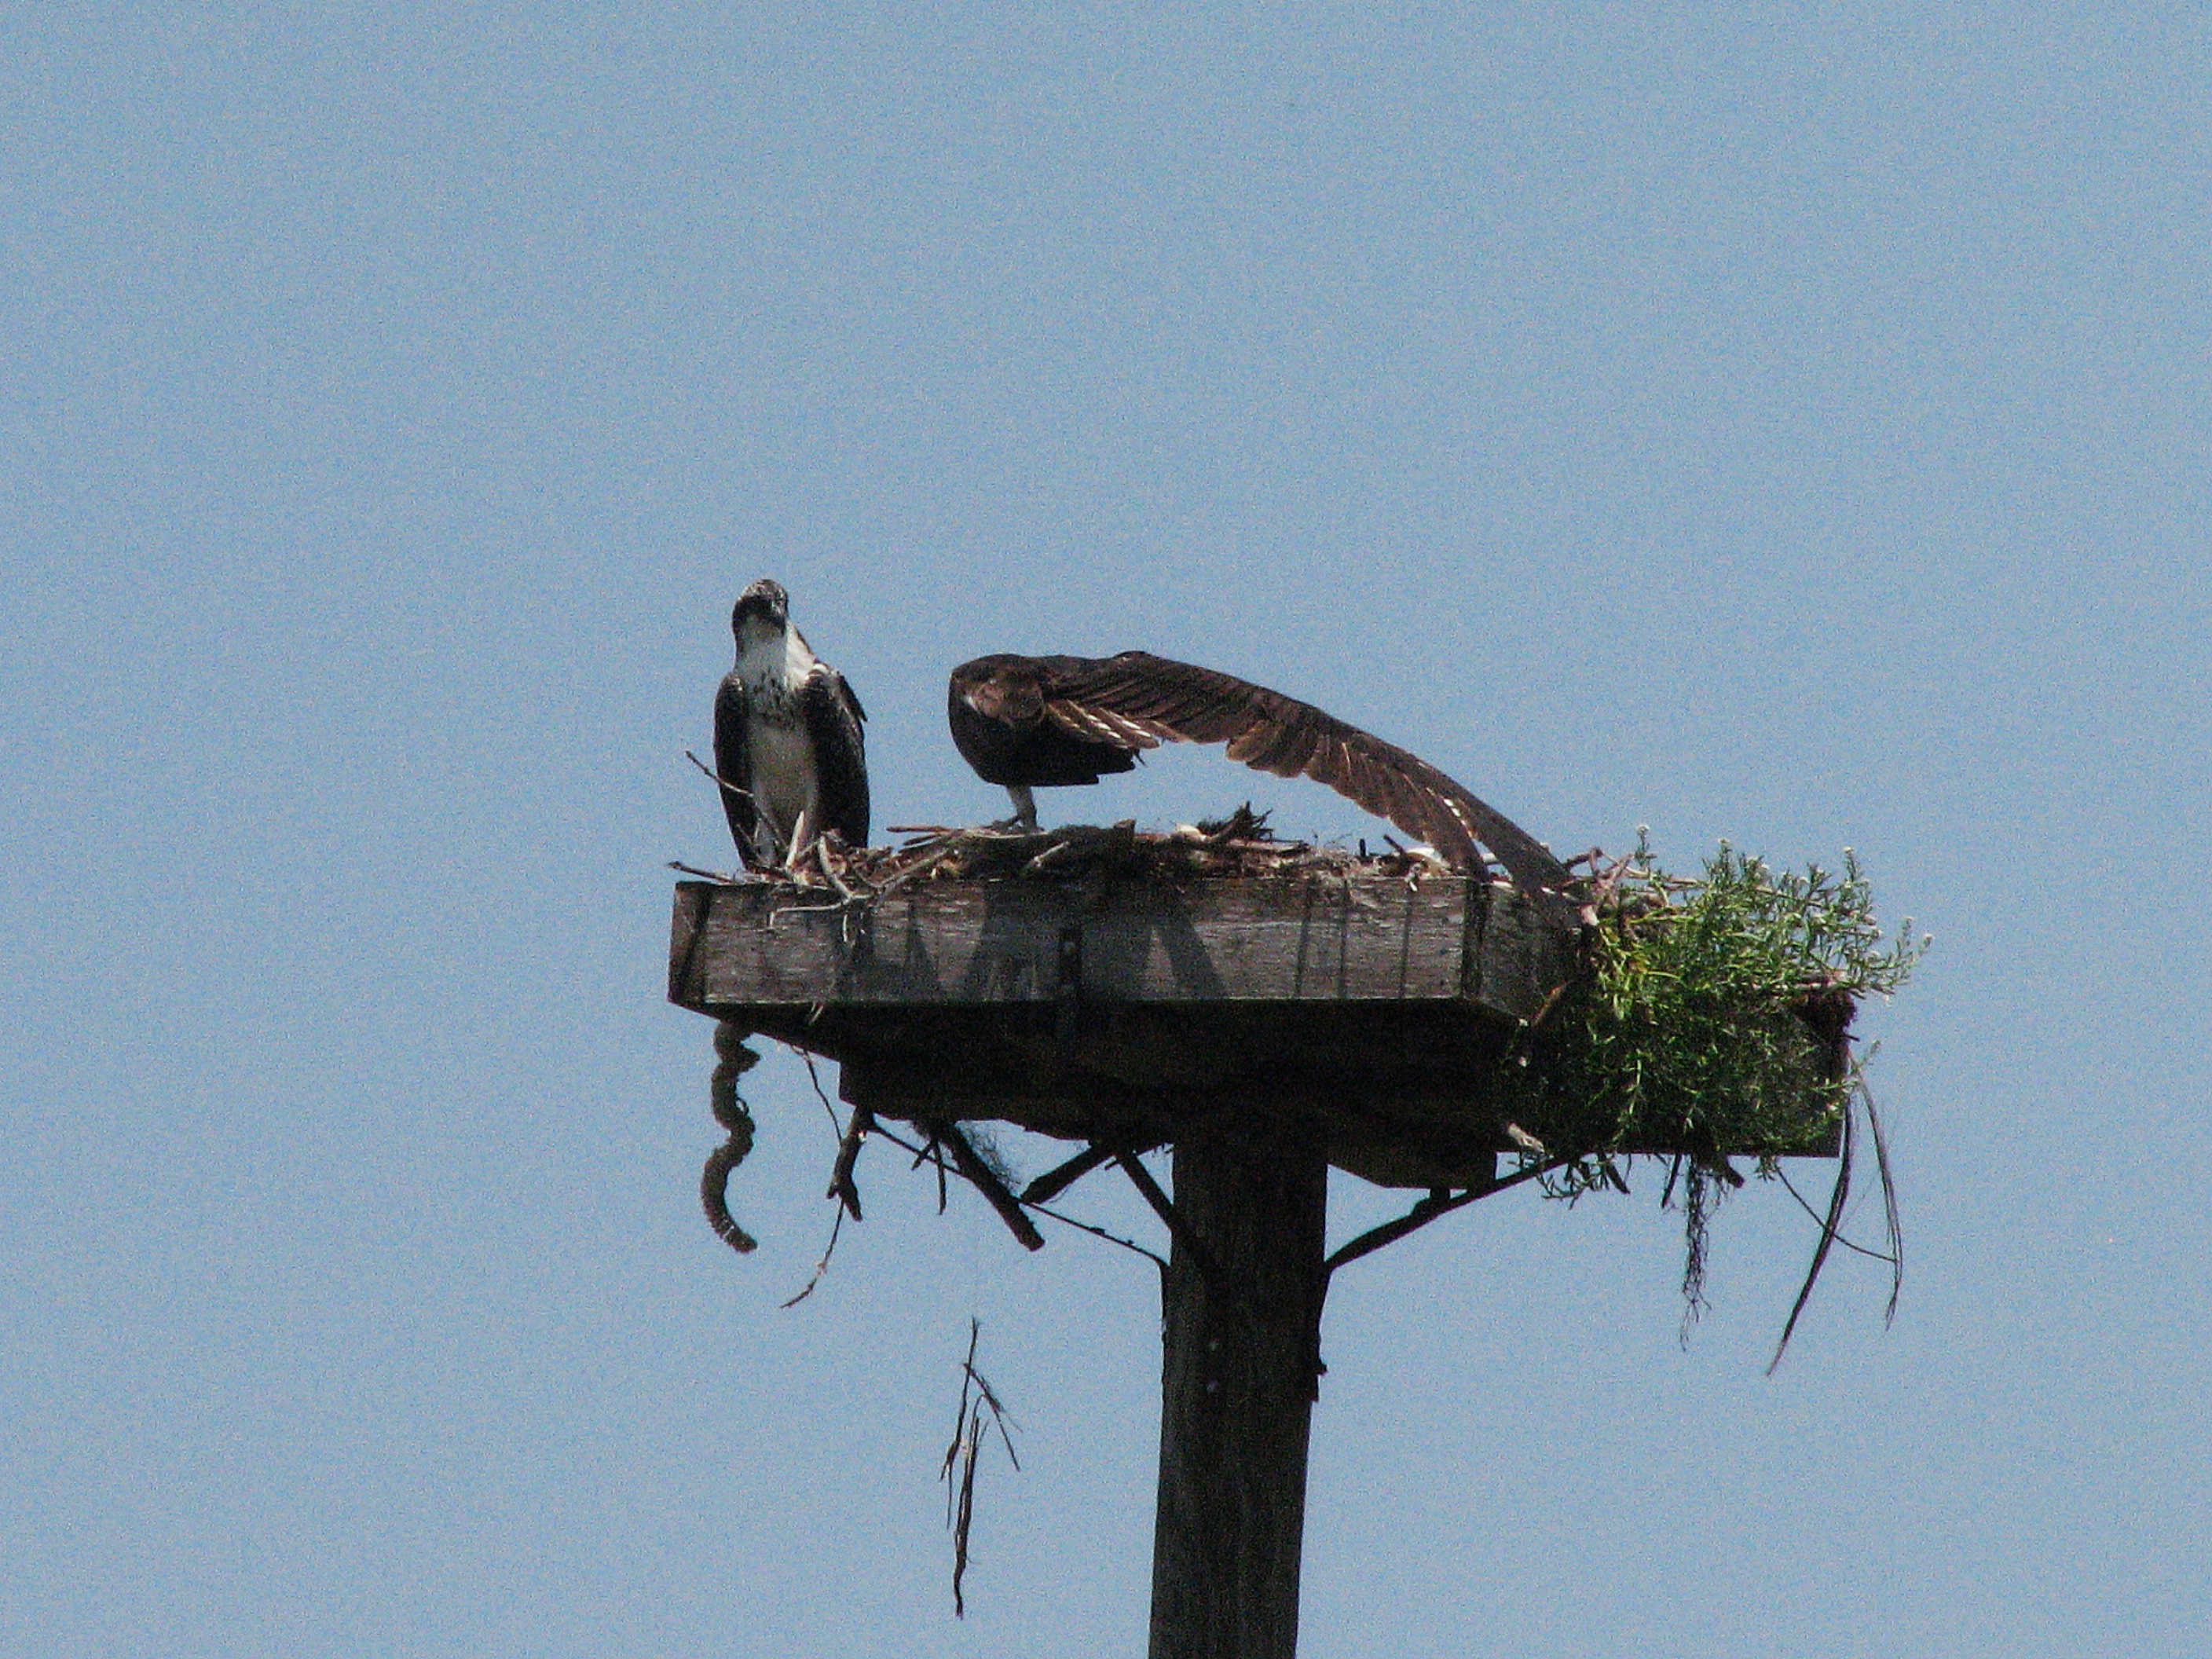 Mama osprey doing Pilates..streeetch...left, right